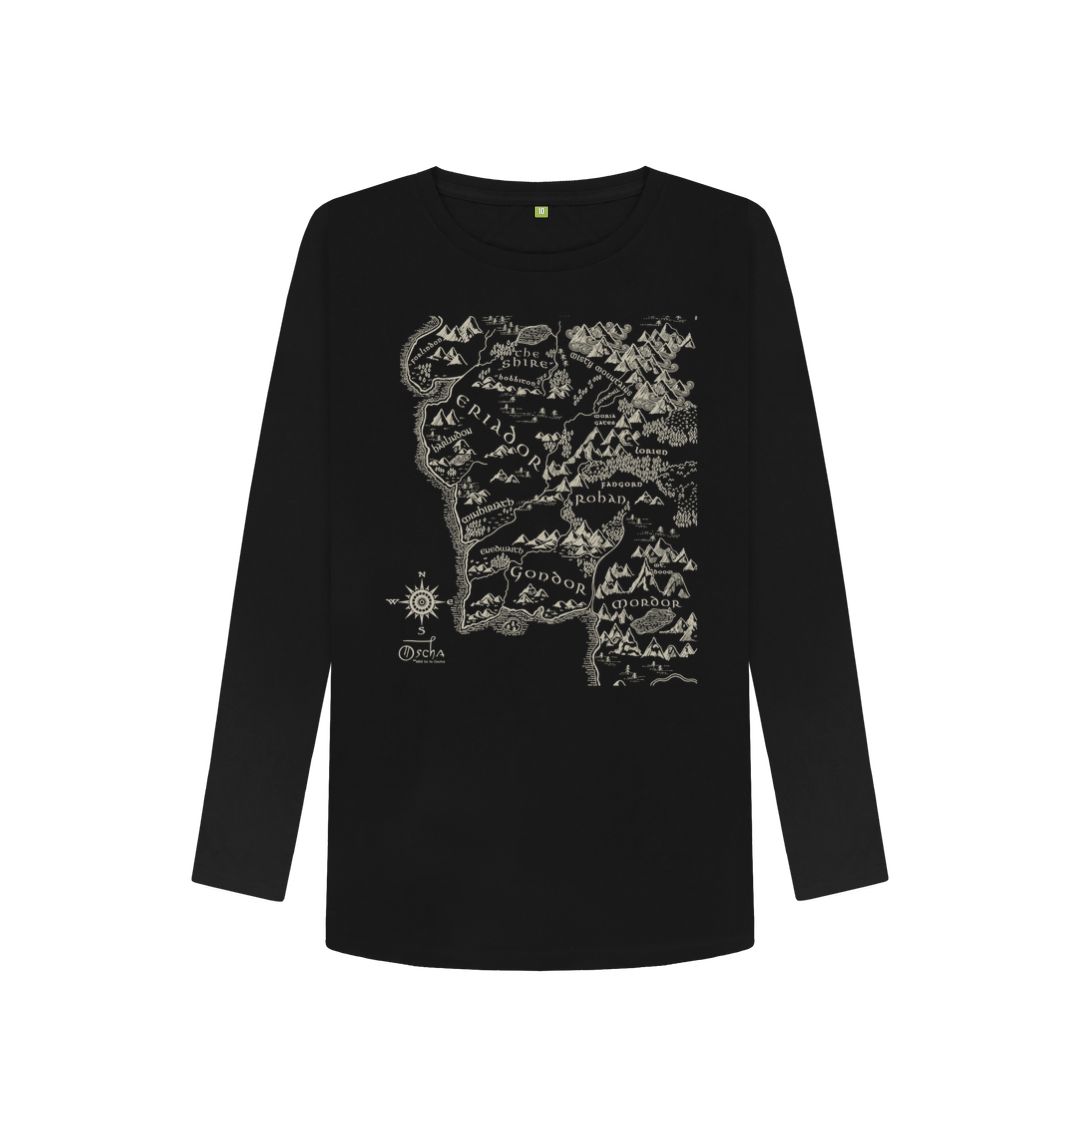 Black Realm of MIDDLE-EARTH\u2122 Women's Long Sleeved T-Shirt